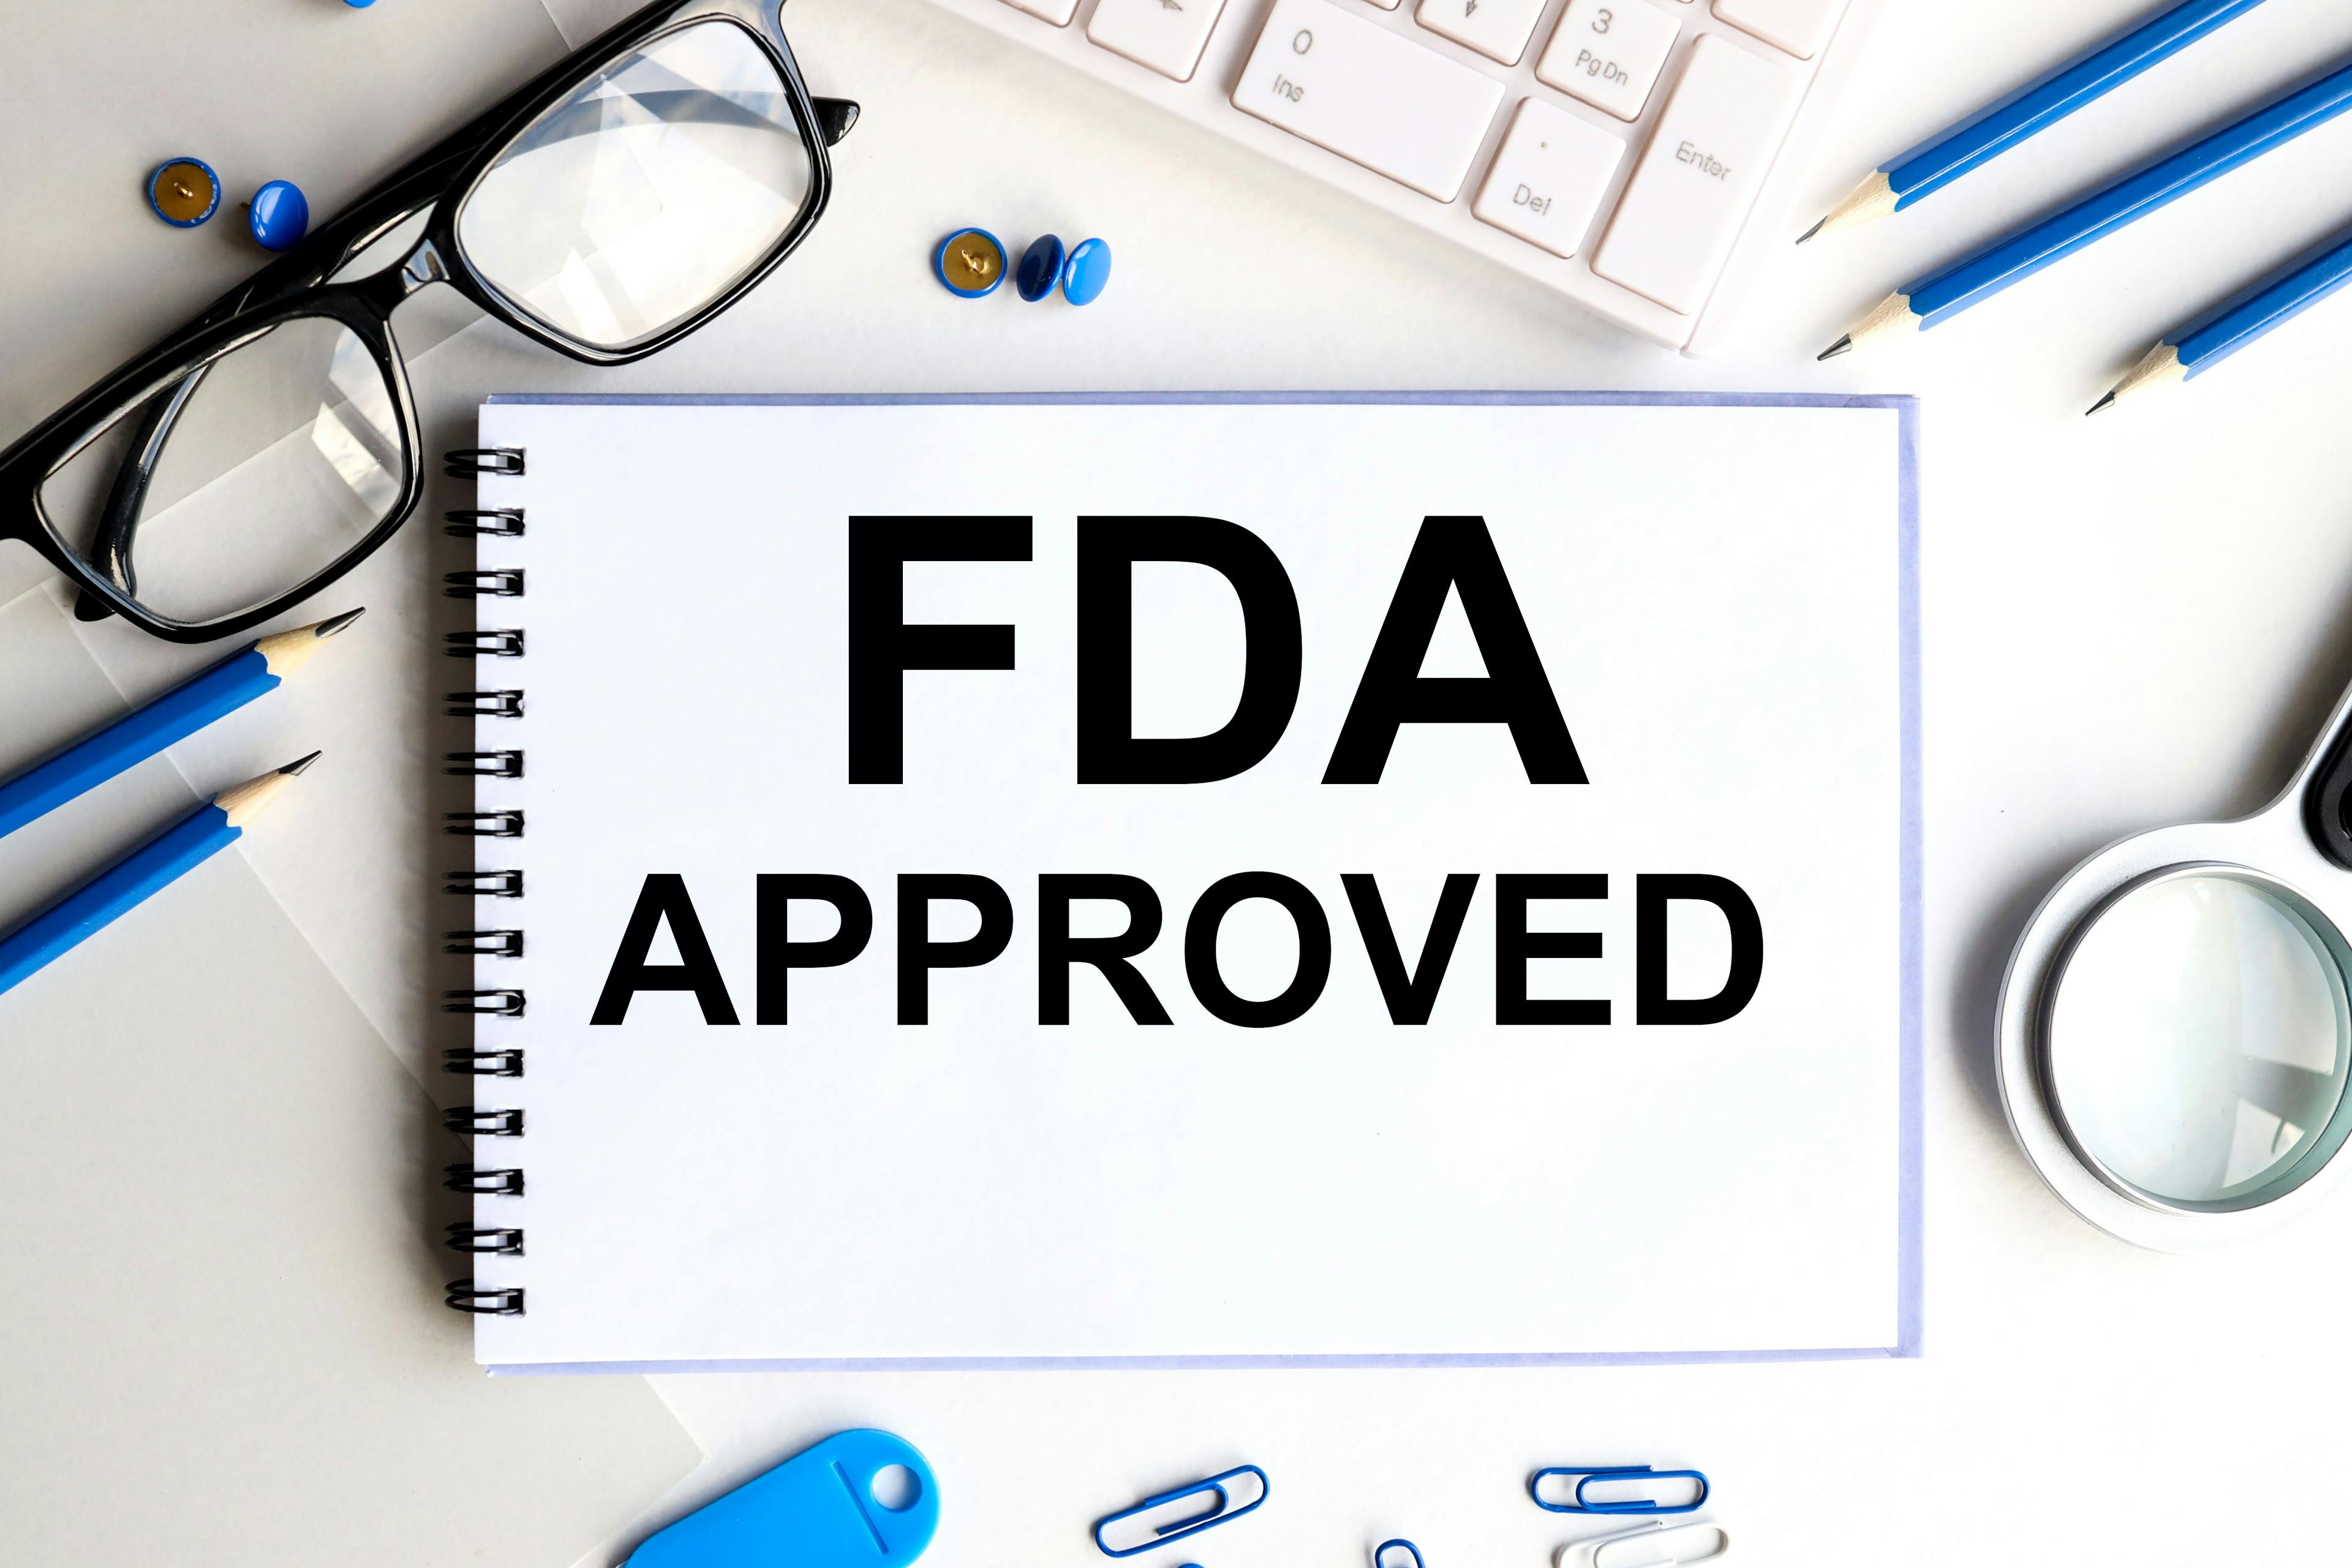 Tralokinumab for Atopic Dermatitis Approved for Adolescents by FDA